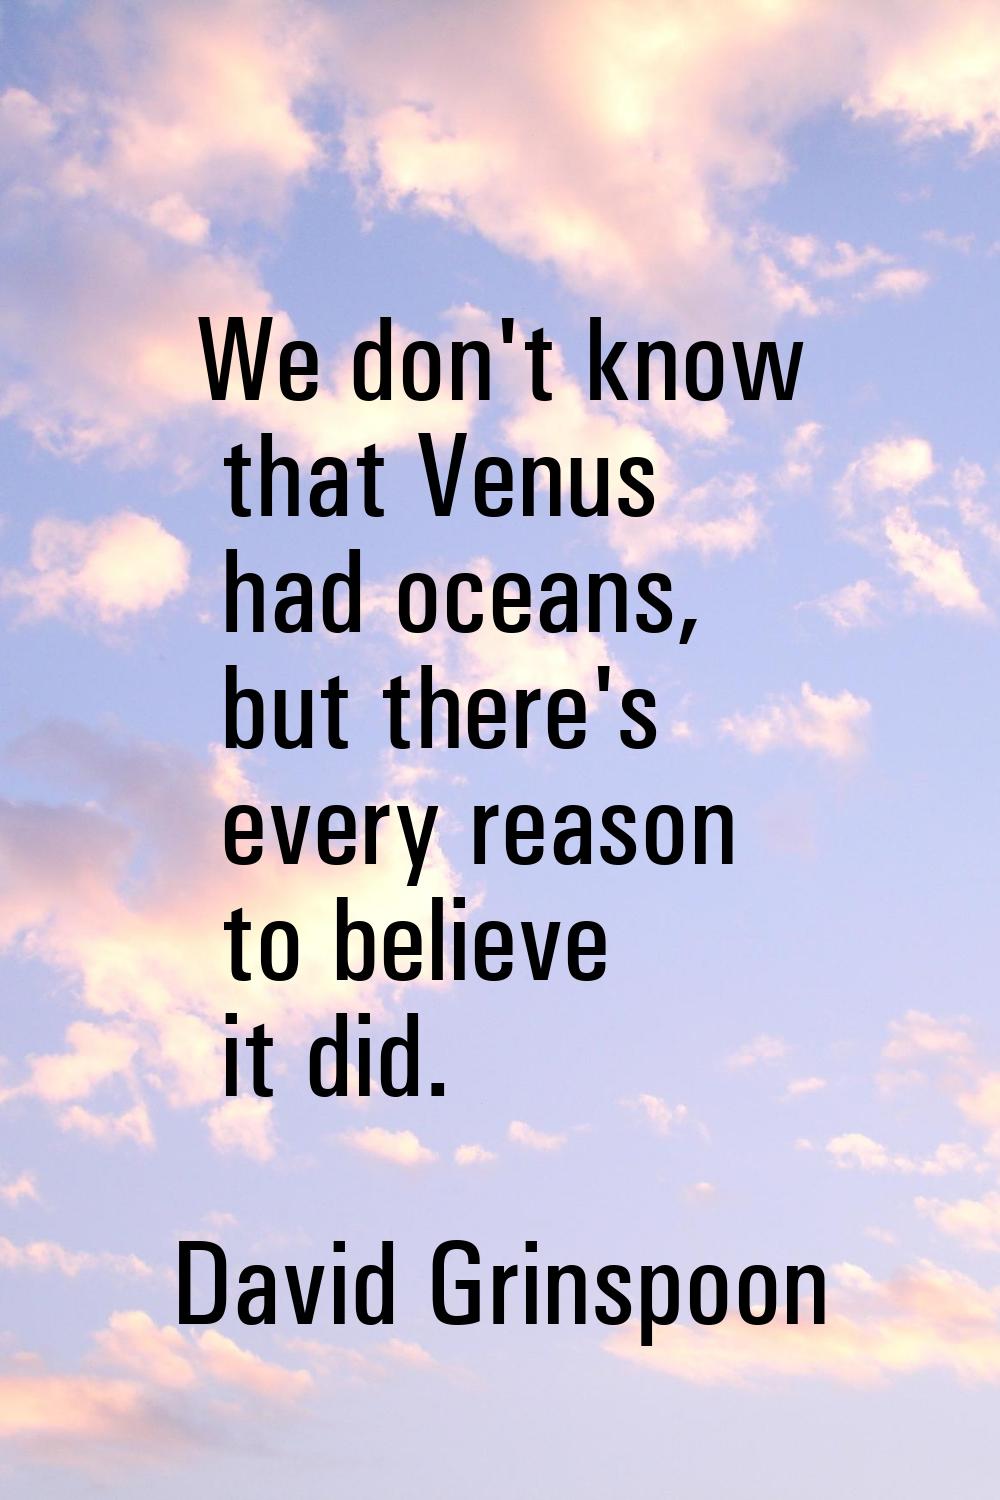 We don't know that Venus had oceans, but there's every reason to believe it did.